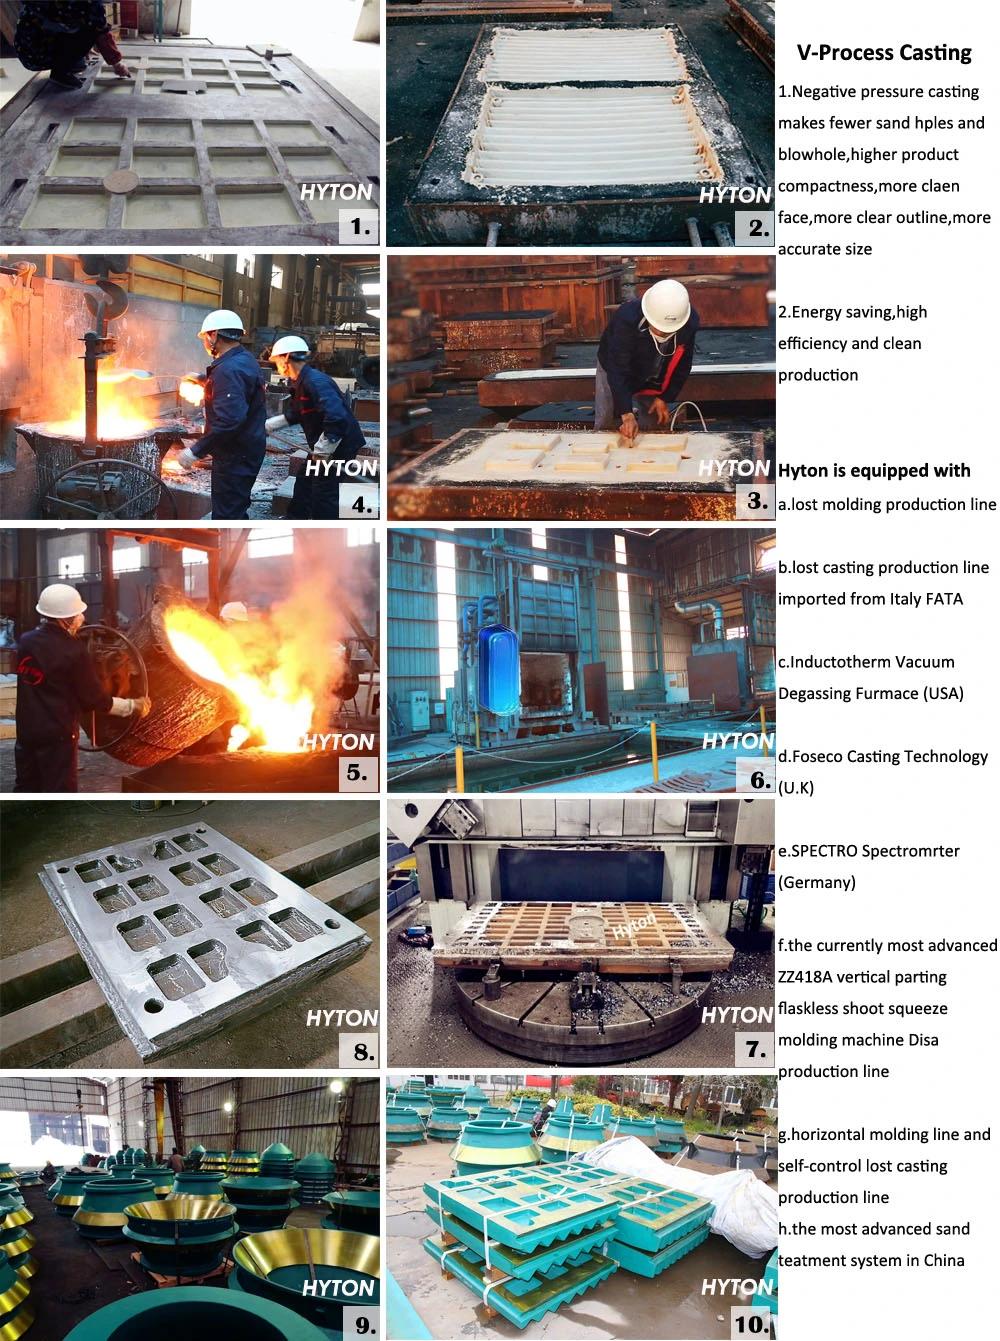 Mn18cr2 Mn13cr2 Manganese Steel Jaw Plate Casting Suit Telsmith H3450 Sbm Stone Jaw Crusher Wear Liners